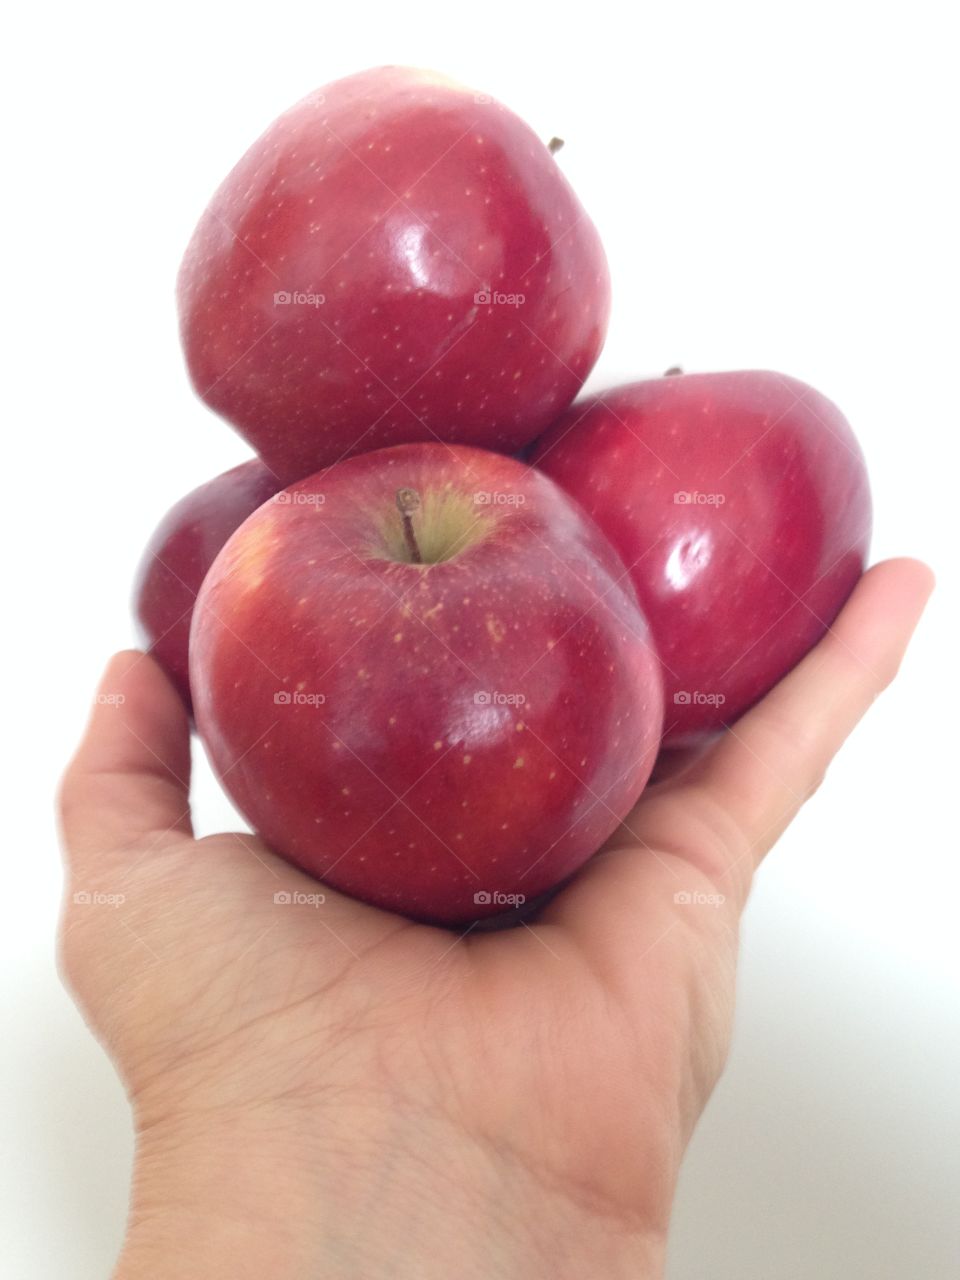 Holding red delicious apples 